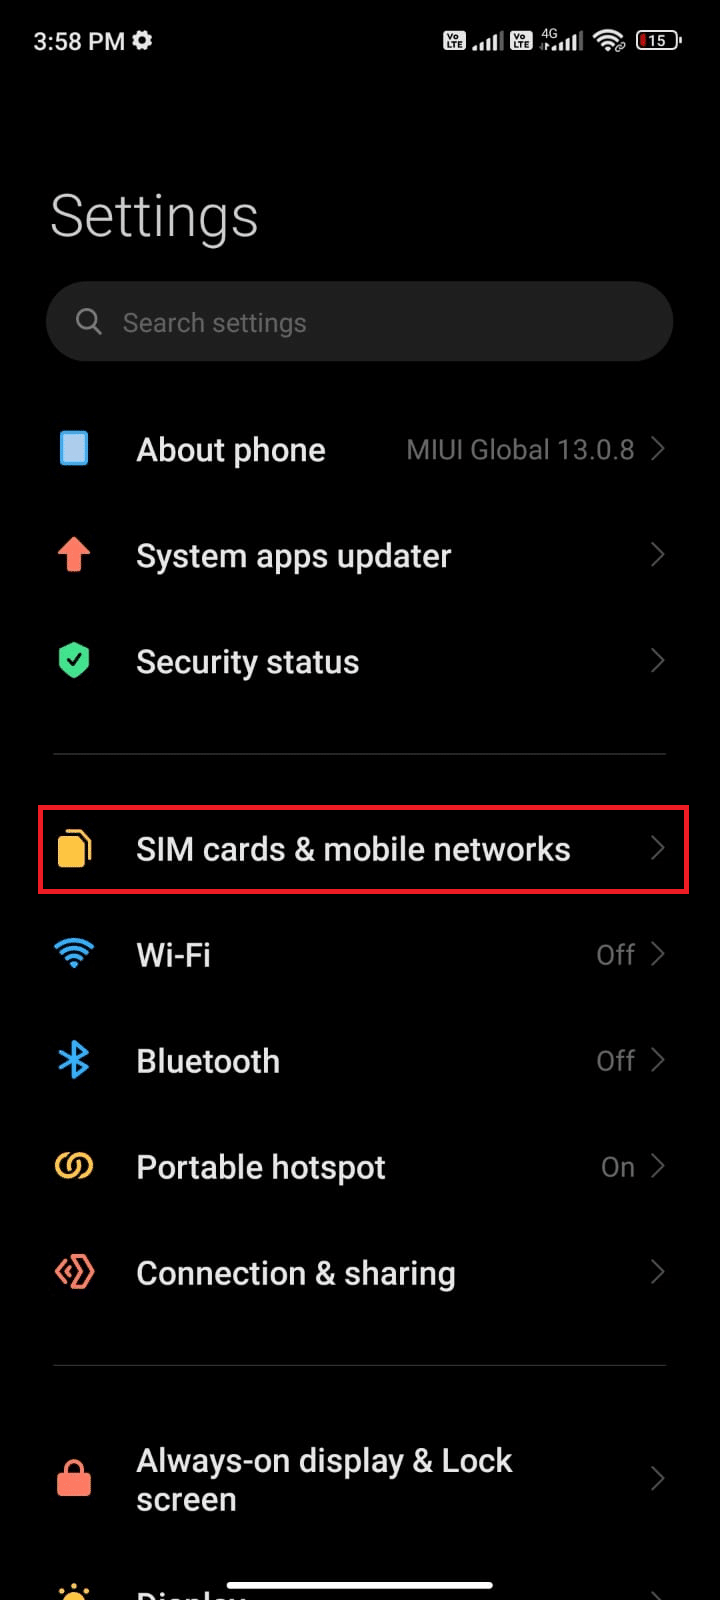 tap the SIM cards mobile networks option. Fix WhatsApp Last Seen Not Showing